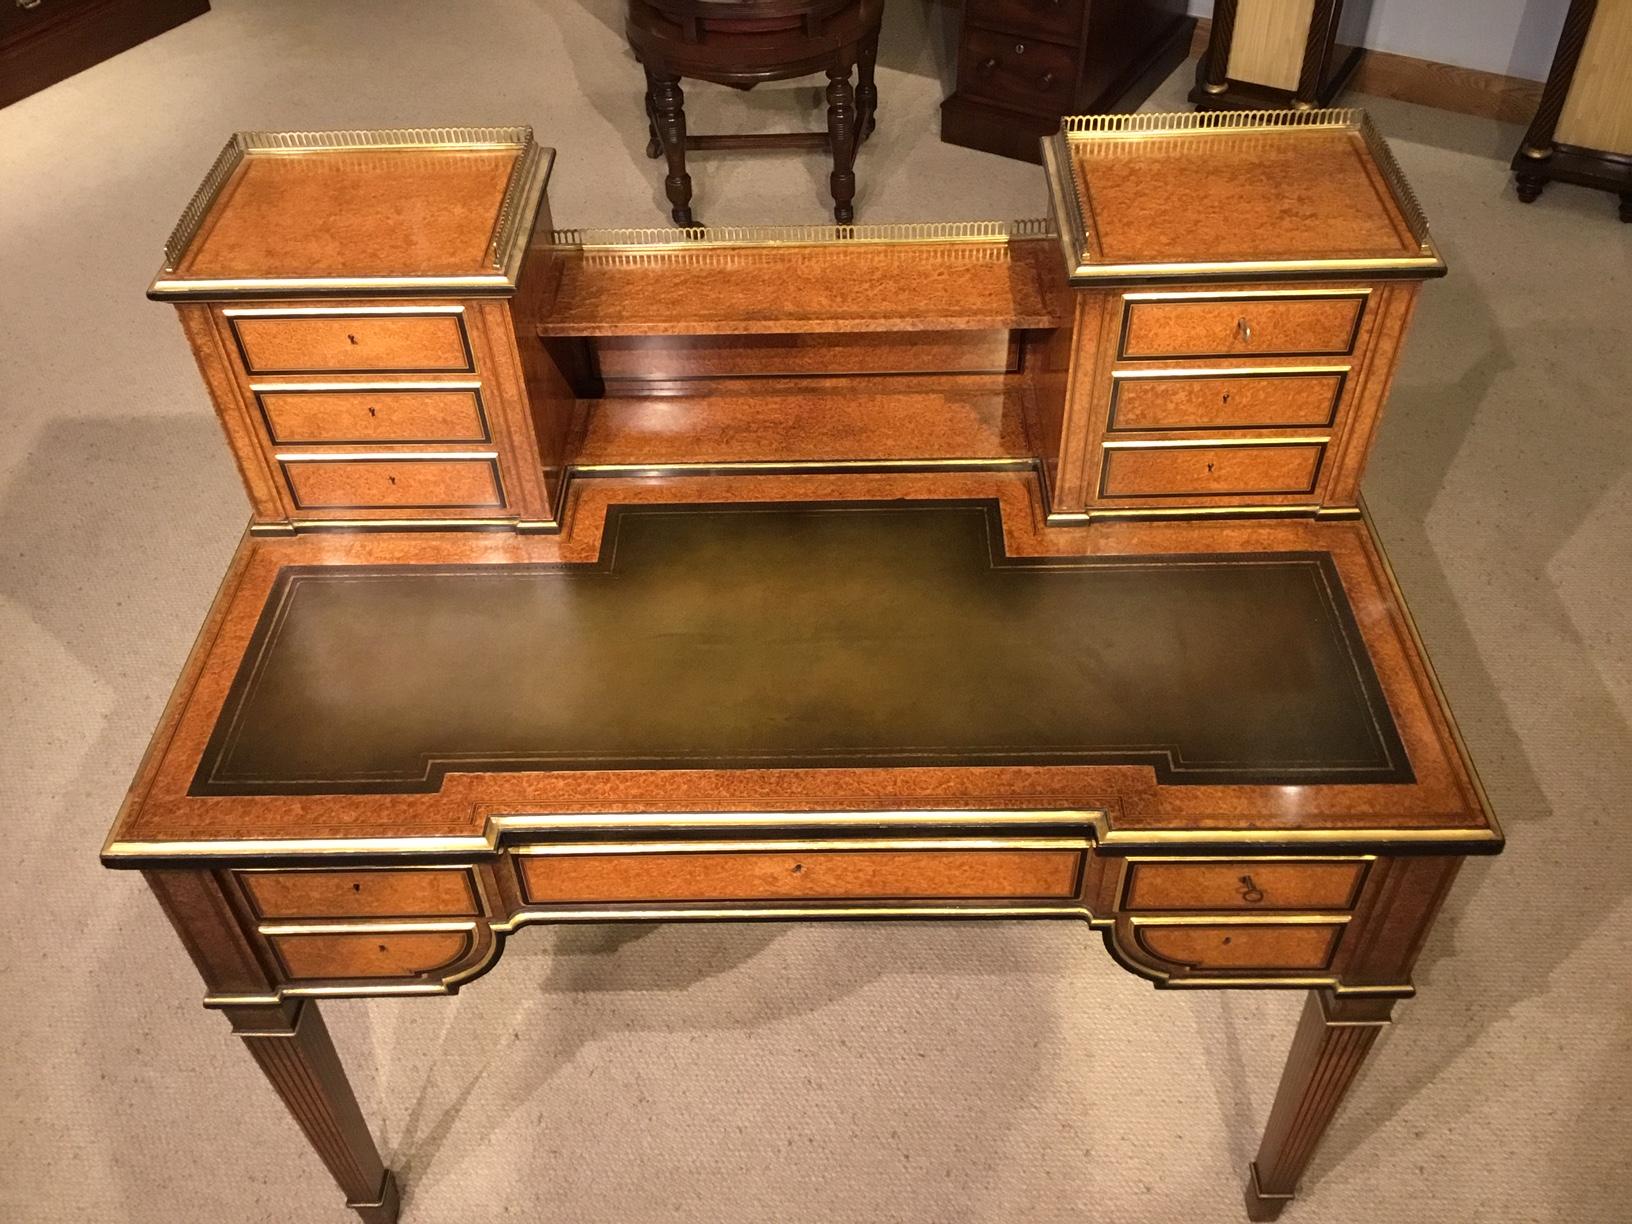 A rare amboyna, parcel-gilt and ebony Victorian period antique writing desk. Having a raised super structure with a brass gallery with six rectangular mahogany lined drawers and a shelf, veneered in the finest amboyna with parcel gilt detail and